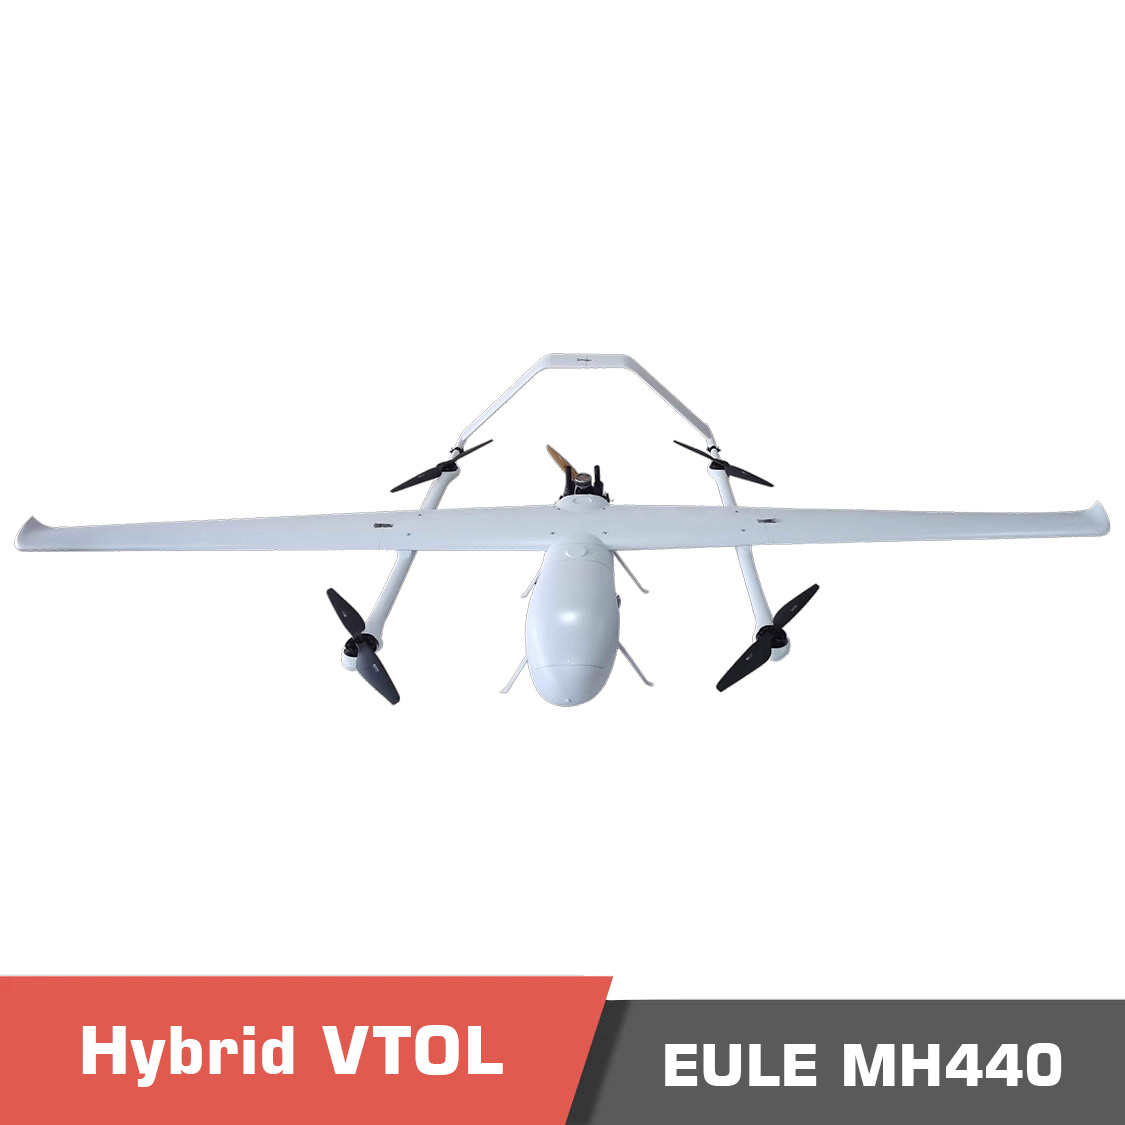 Temp eule mh440. 2 - ms-210,ms-210 vtol,ms-210 flying wing vtol,flying wing,flying wing vtol drone,long endurance,fixedwing uav,cargo drone,wind resistance,detachable load,mapping drone,detachable payload,surveying drone,fixed-wing uav,heavy lift drone,vertical take-off,vertical landing,redundant sensors,four-axis,eight-propeller rotor,low temperature resistance - motionew - 16